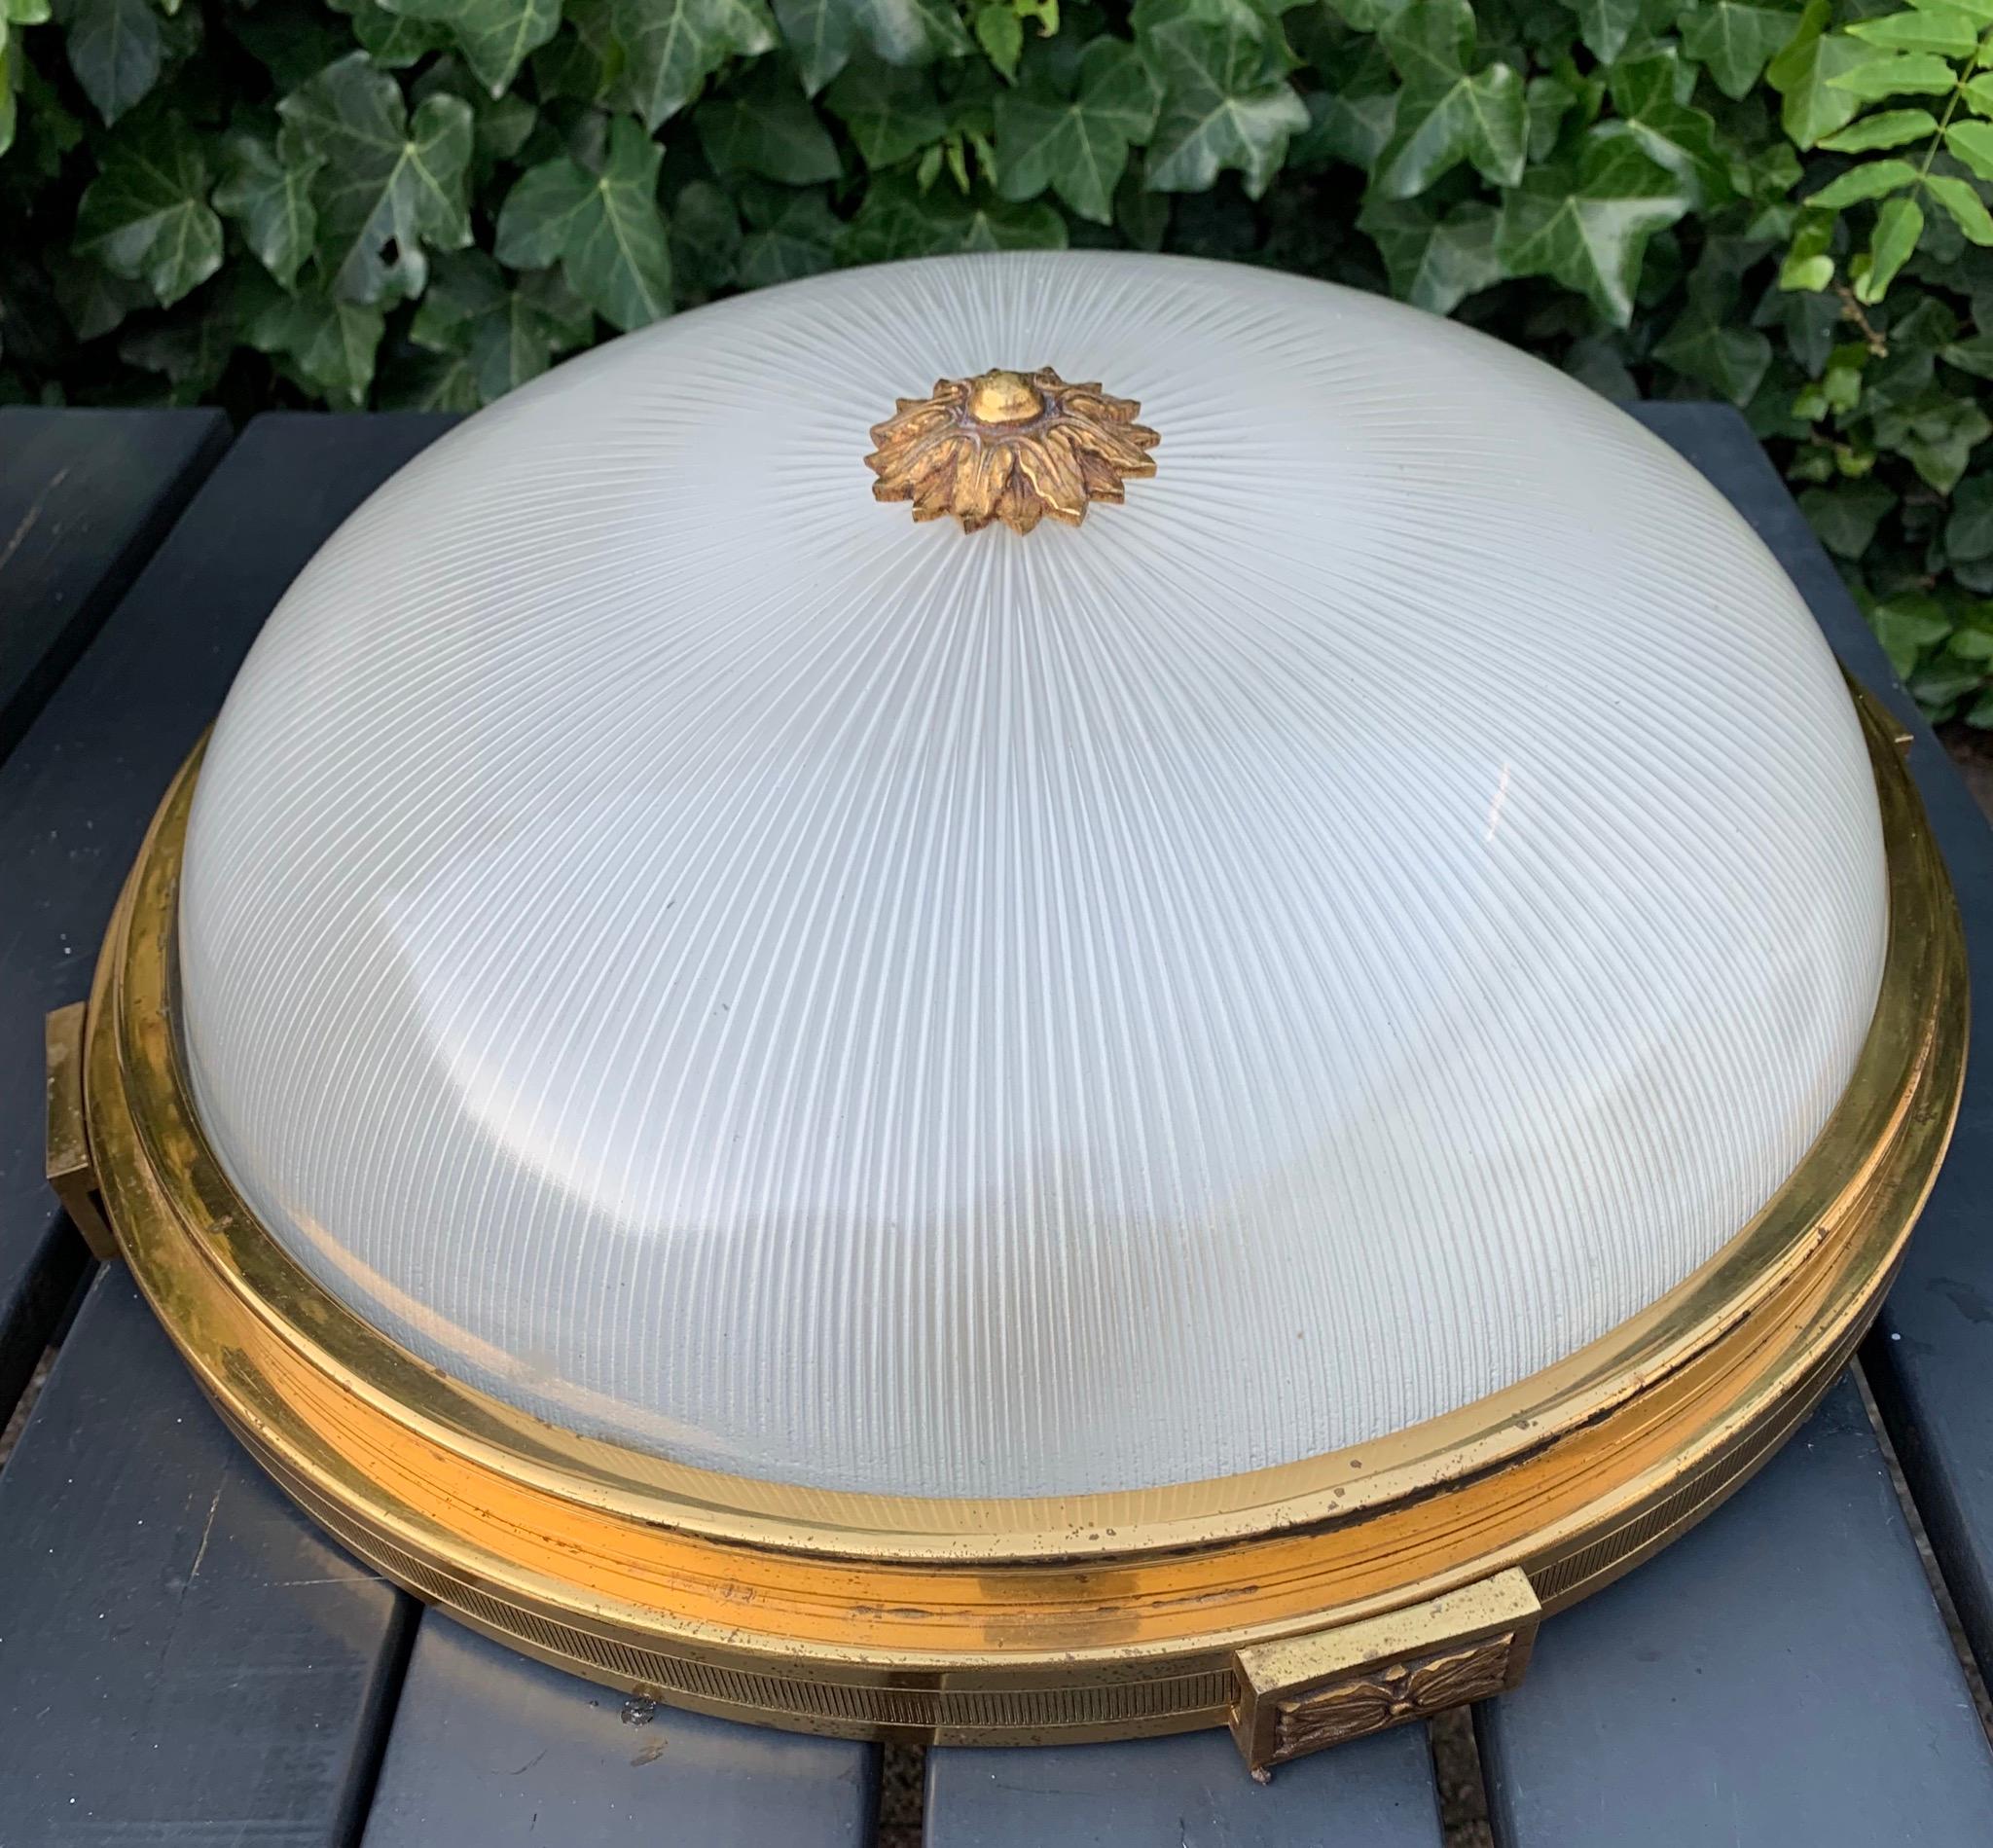 Rare and great looking, early 20th century large Holophane light fixture.

With early 20th century lighting being one of our specialities, finding this rare and extraordinary flush mount more than made our day. It is clear that Holophane have made